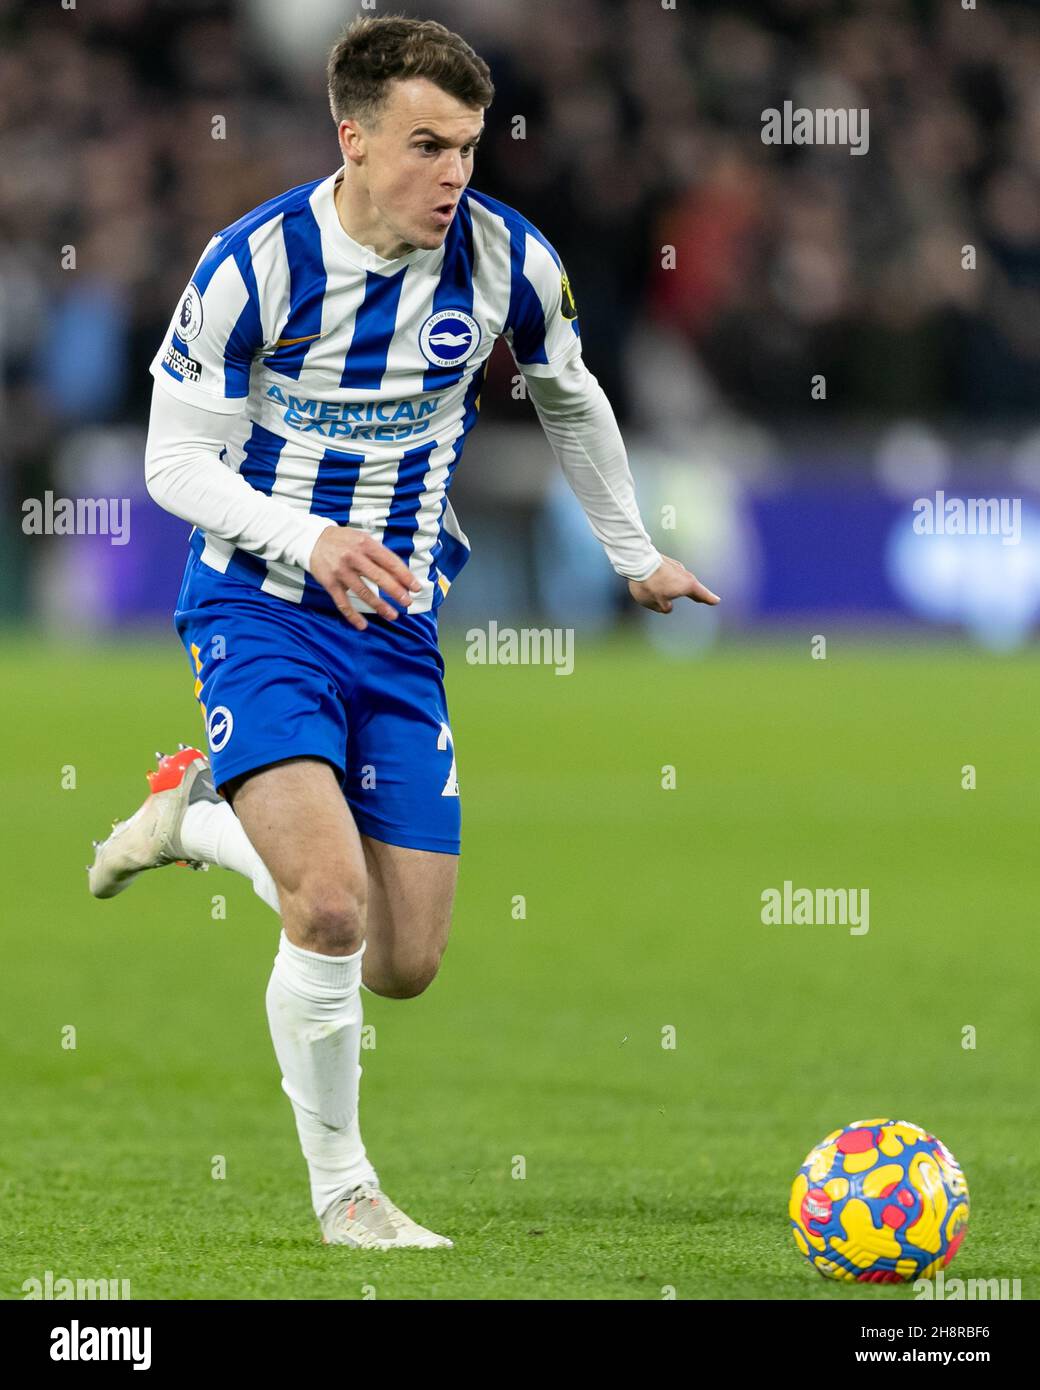 LONDON, GBR DEC 1ST Solly March of Brighton & Hove Albion in action during the Premier League match between West Ham United and Brighton and Hove Albion at the London Stadium, Stratford on Wednesday 1st December 2021. (Credit: Juan Gasparini | MI NEWS) Credit: MI News & Sport /Alamy Live News Stock Photo